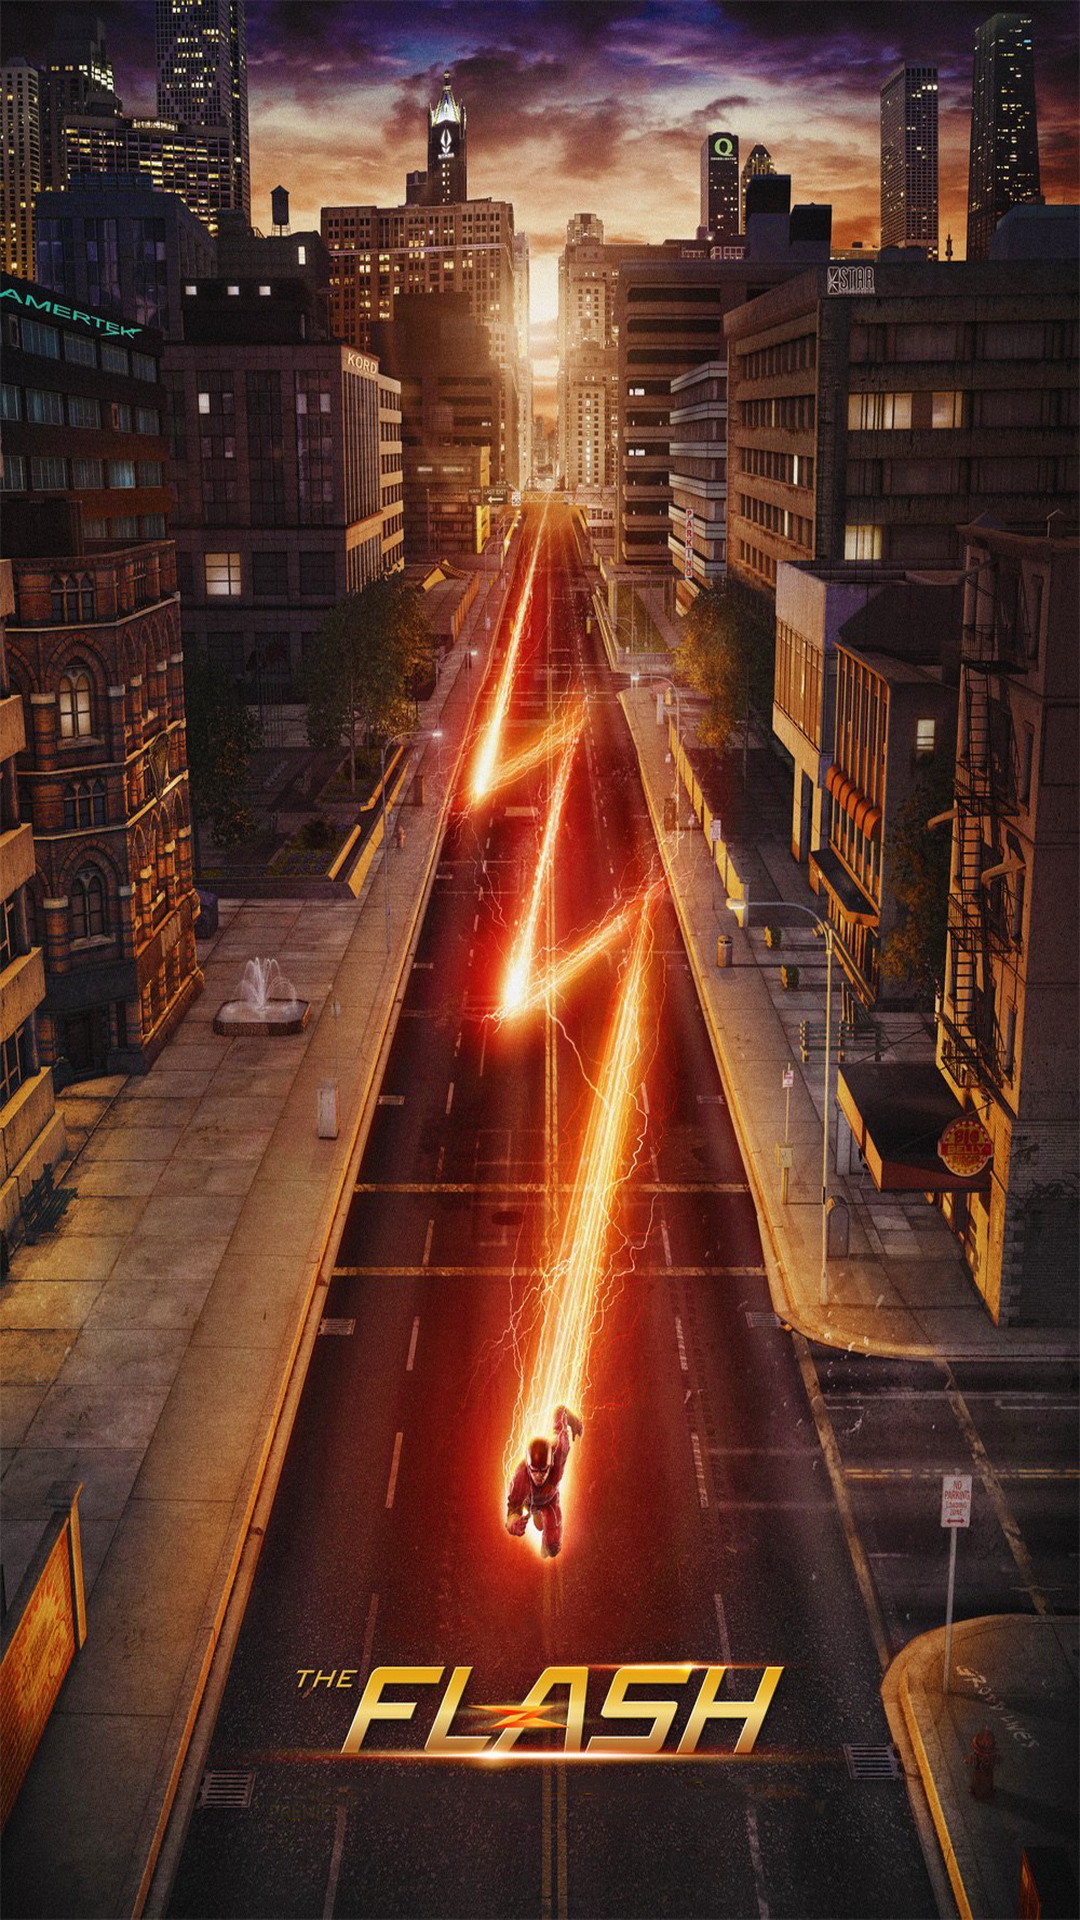 Wallpaper Weekends The Flash For Your Iphone 6 Plus Mactrast Iphone12 スマホ壁紙 待受画像ギャラリー